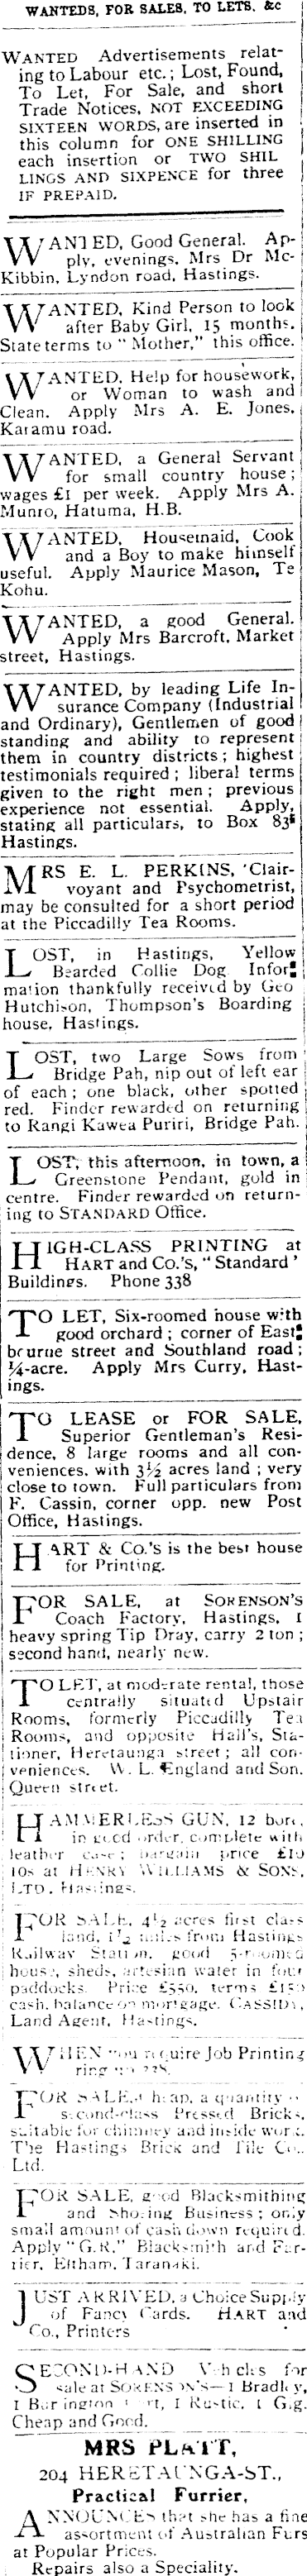 Papers Past Newspapers Hastings Standard 30 April 1910 Page 1 Advertisements Column 5